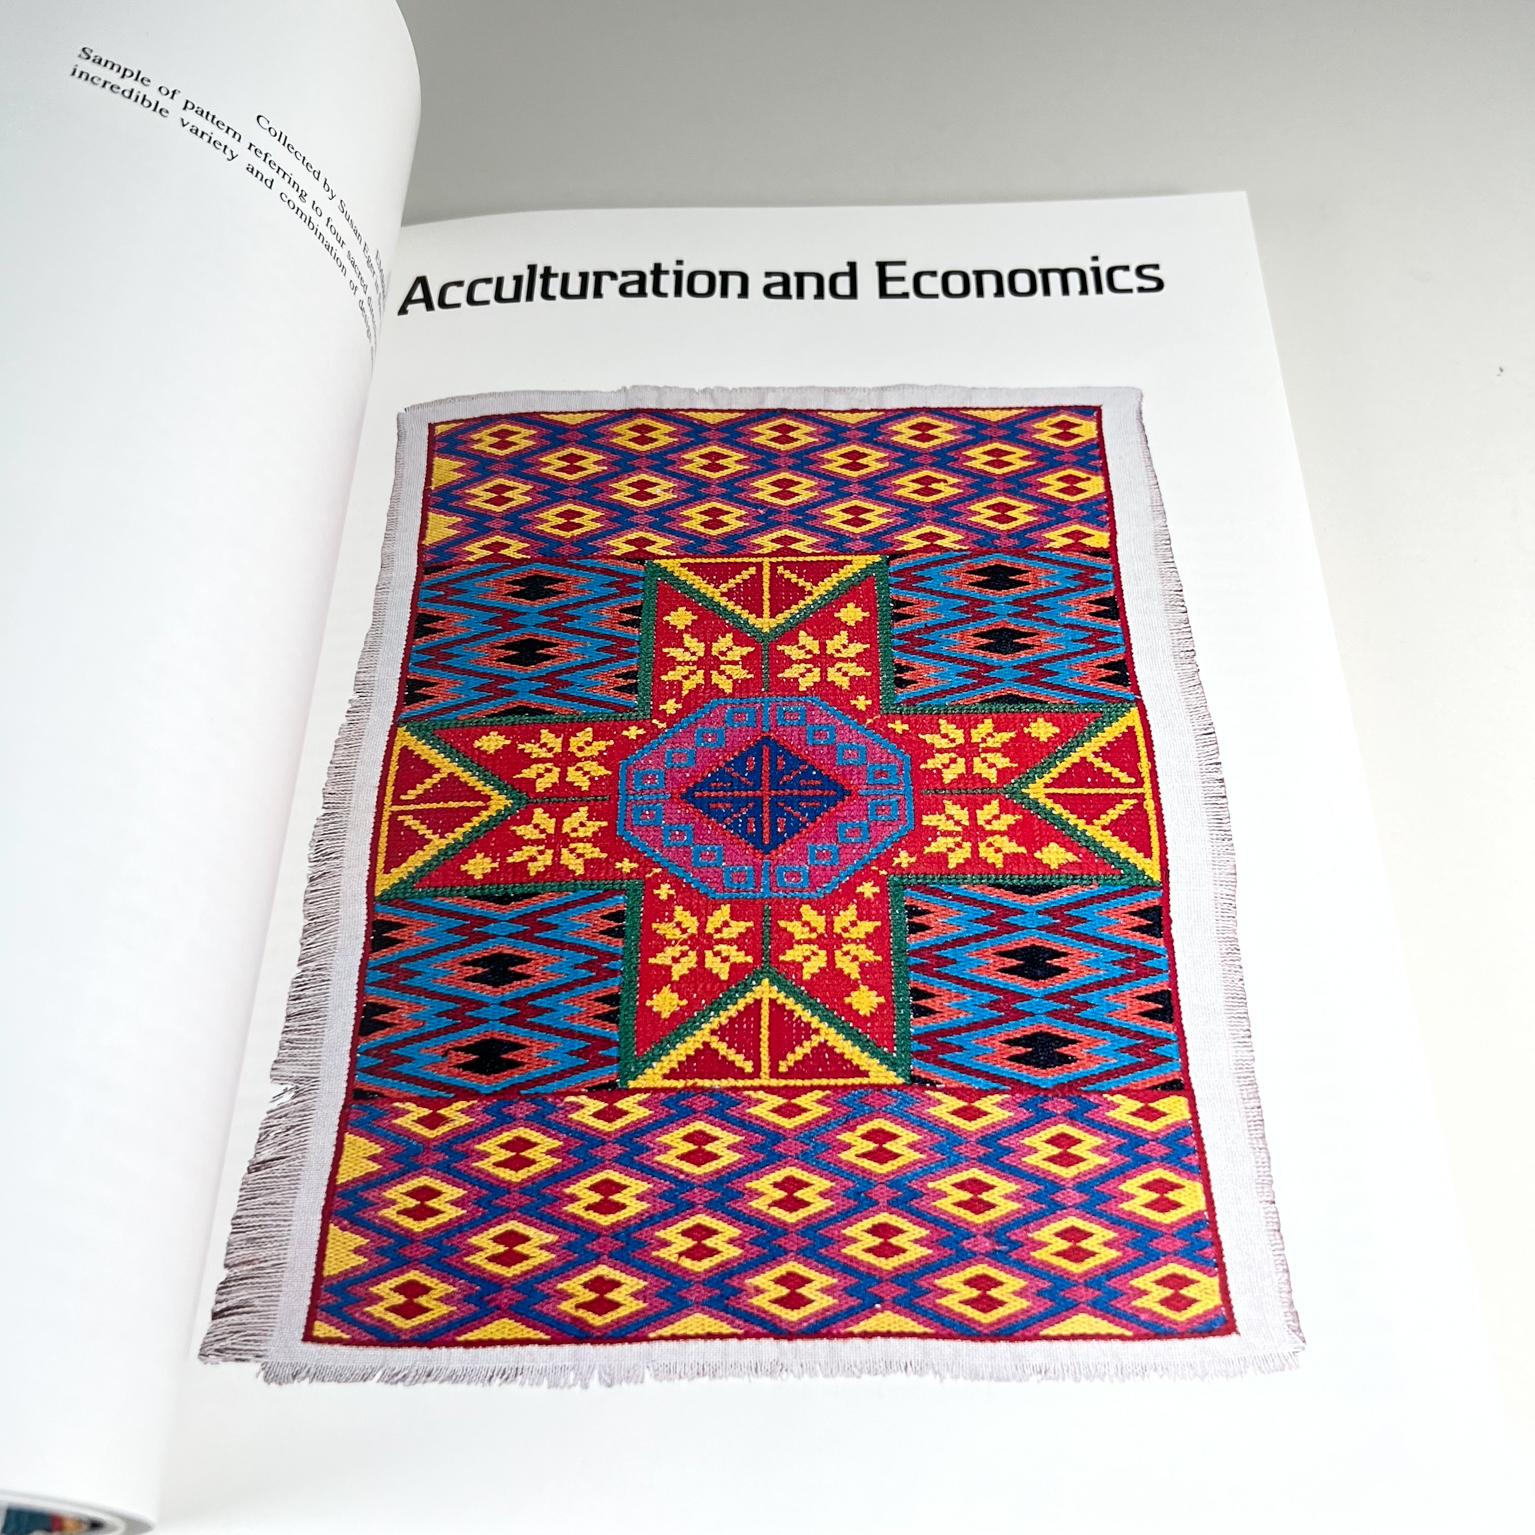 Paper 1978 Art of the Huichol Indians Fine Arts Museums San Francisco Harry N. Abrams